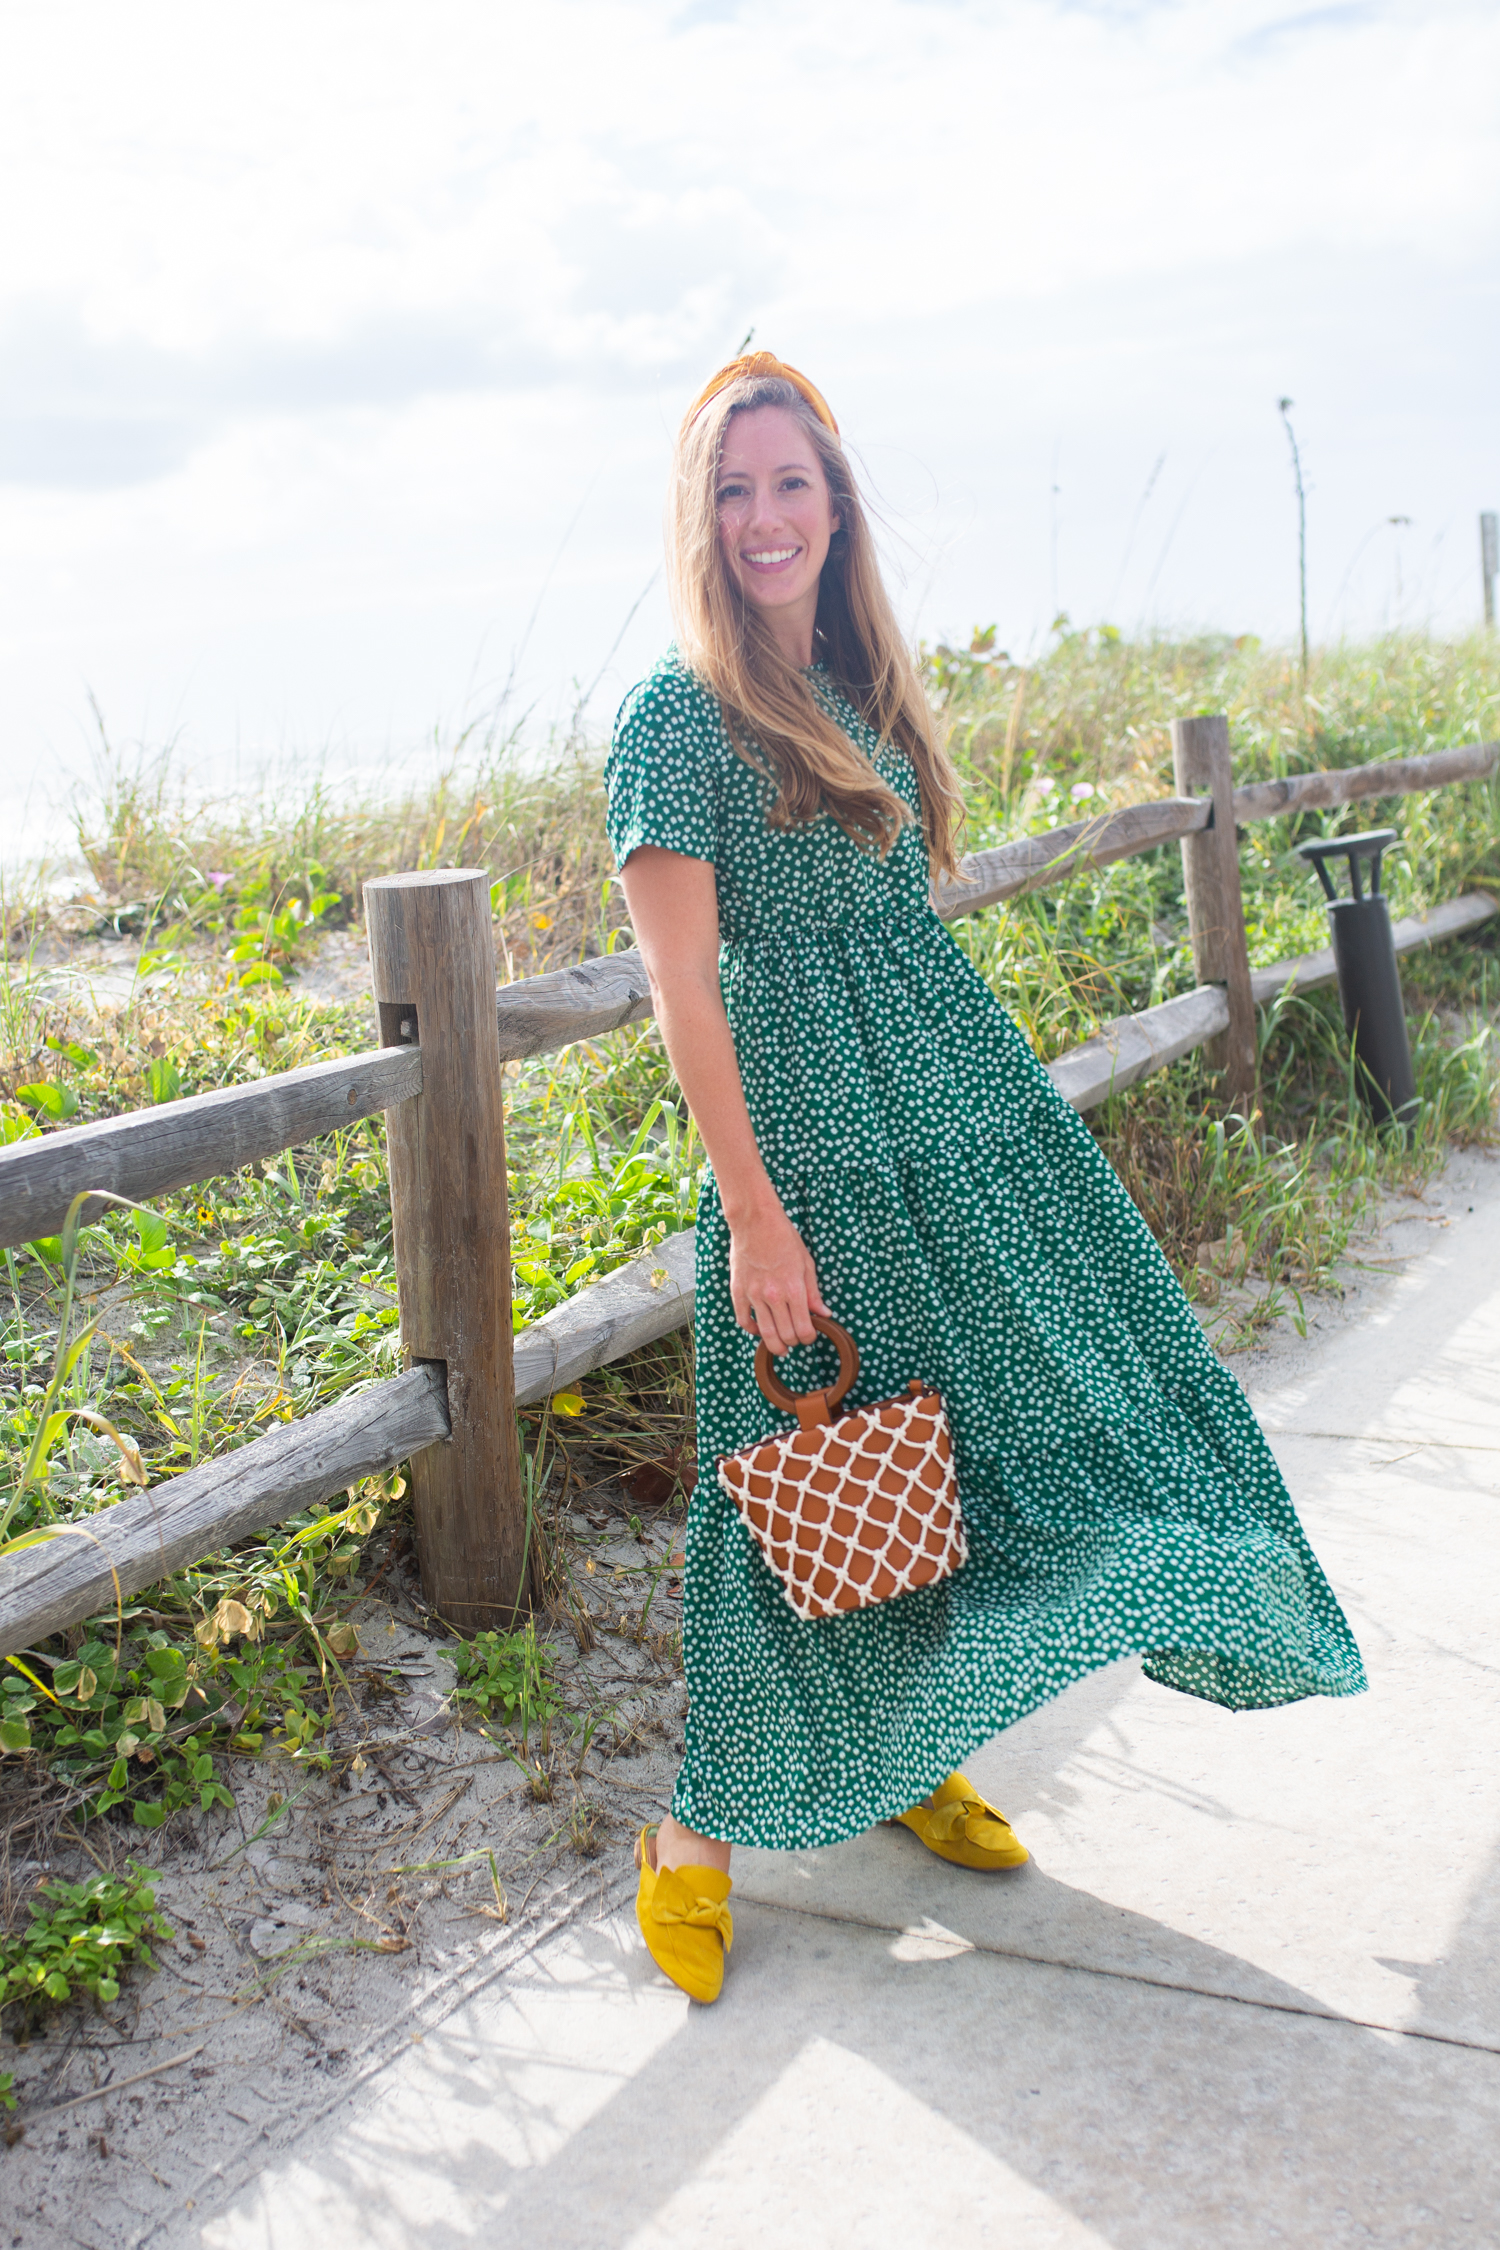 What to Wear This Fall When It's Still Warm Out / Fall Dress Outfit / Fall Dress Casual / Green Maxi Dress / Emerald Dress / Yellow Accessories / Cute Fall Dresses / Autumn Outfits - Sunshine Style, A Florida Fashion and Lifestyle Blog by Katie